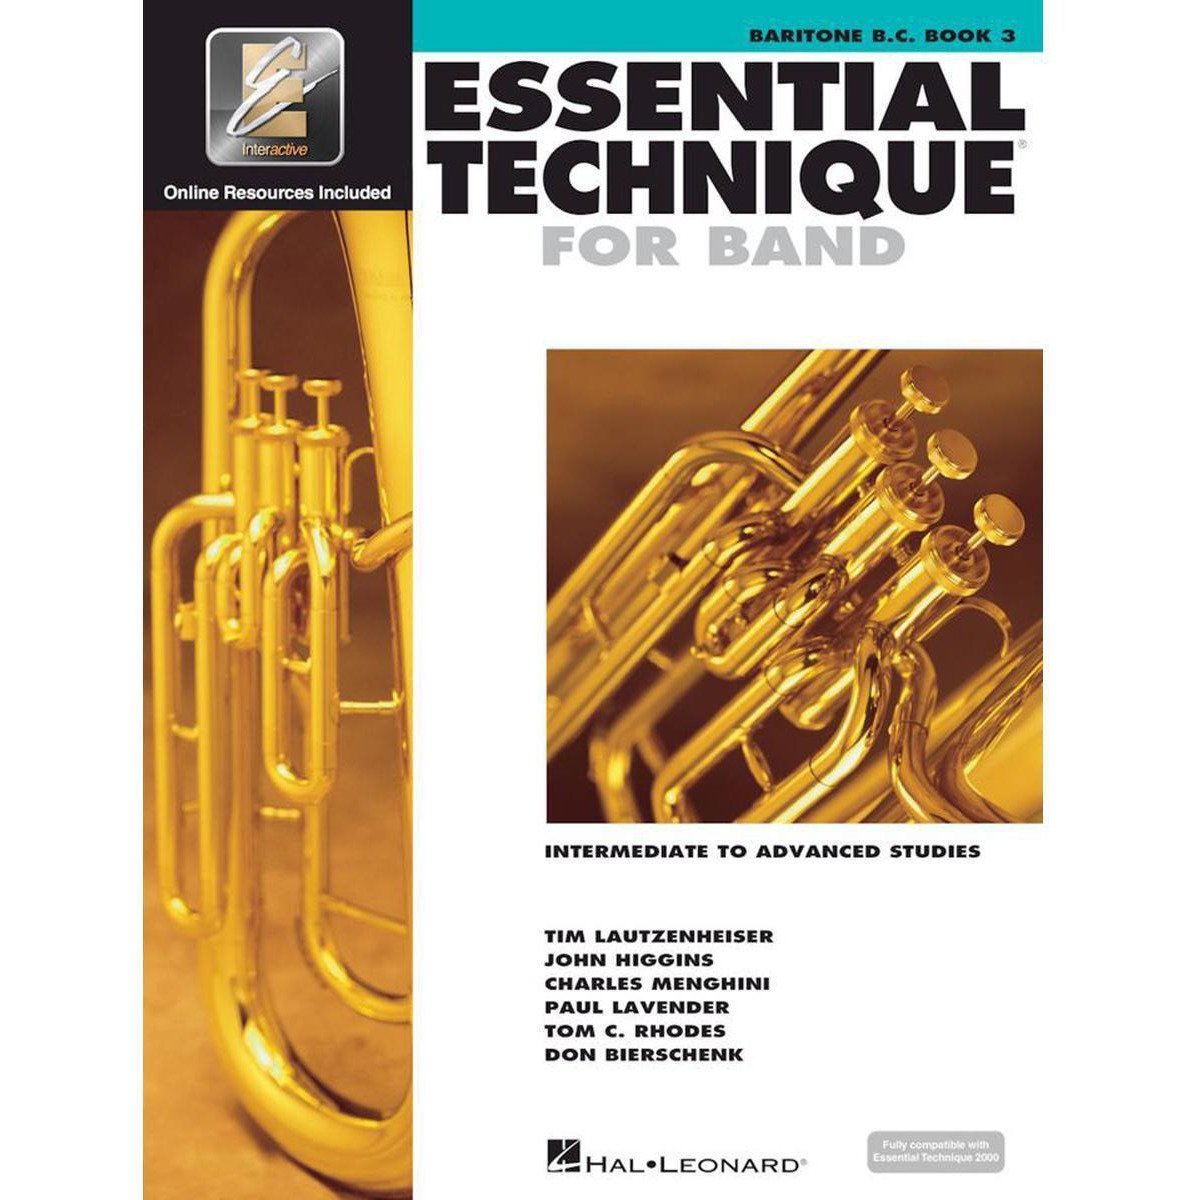 Essential Technique for Band Book 3-Baritone BC-Andy's Music